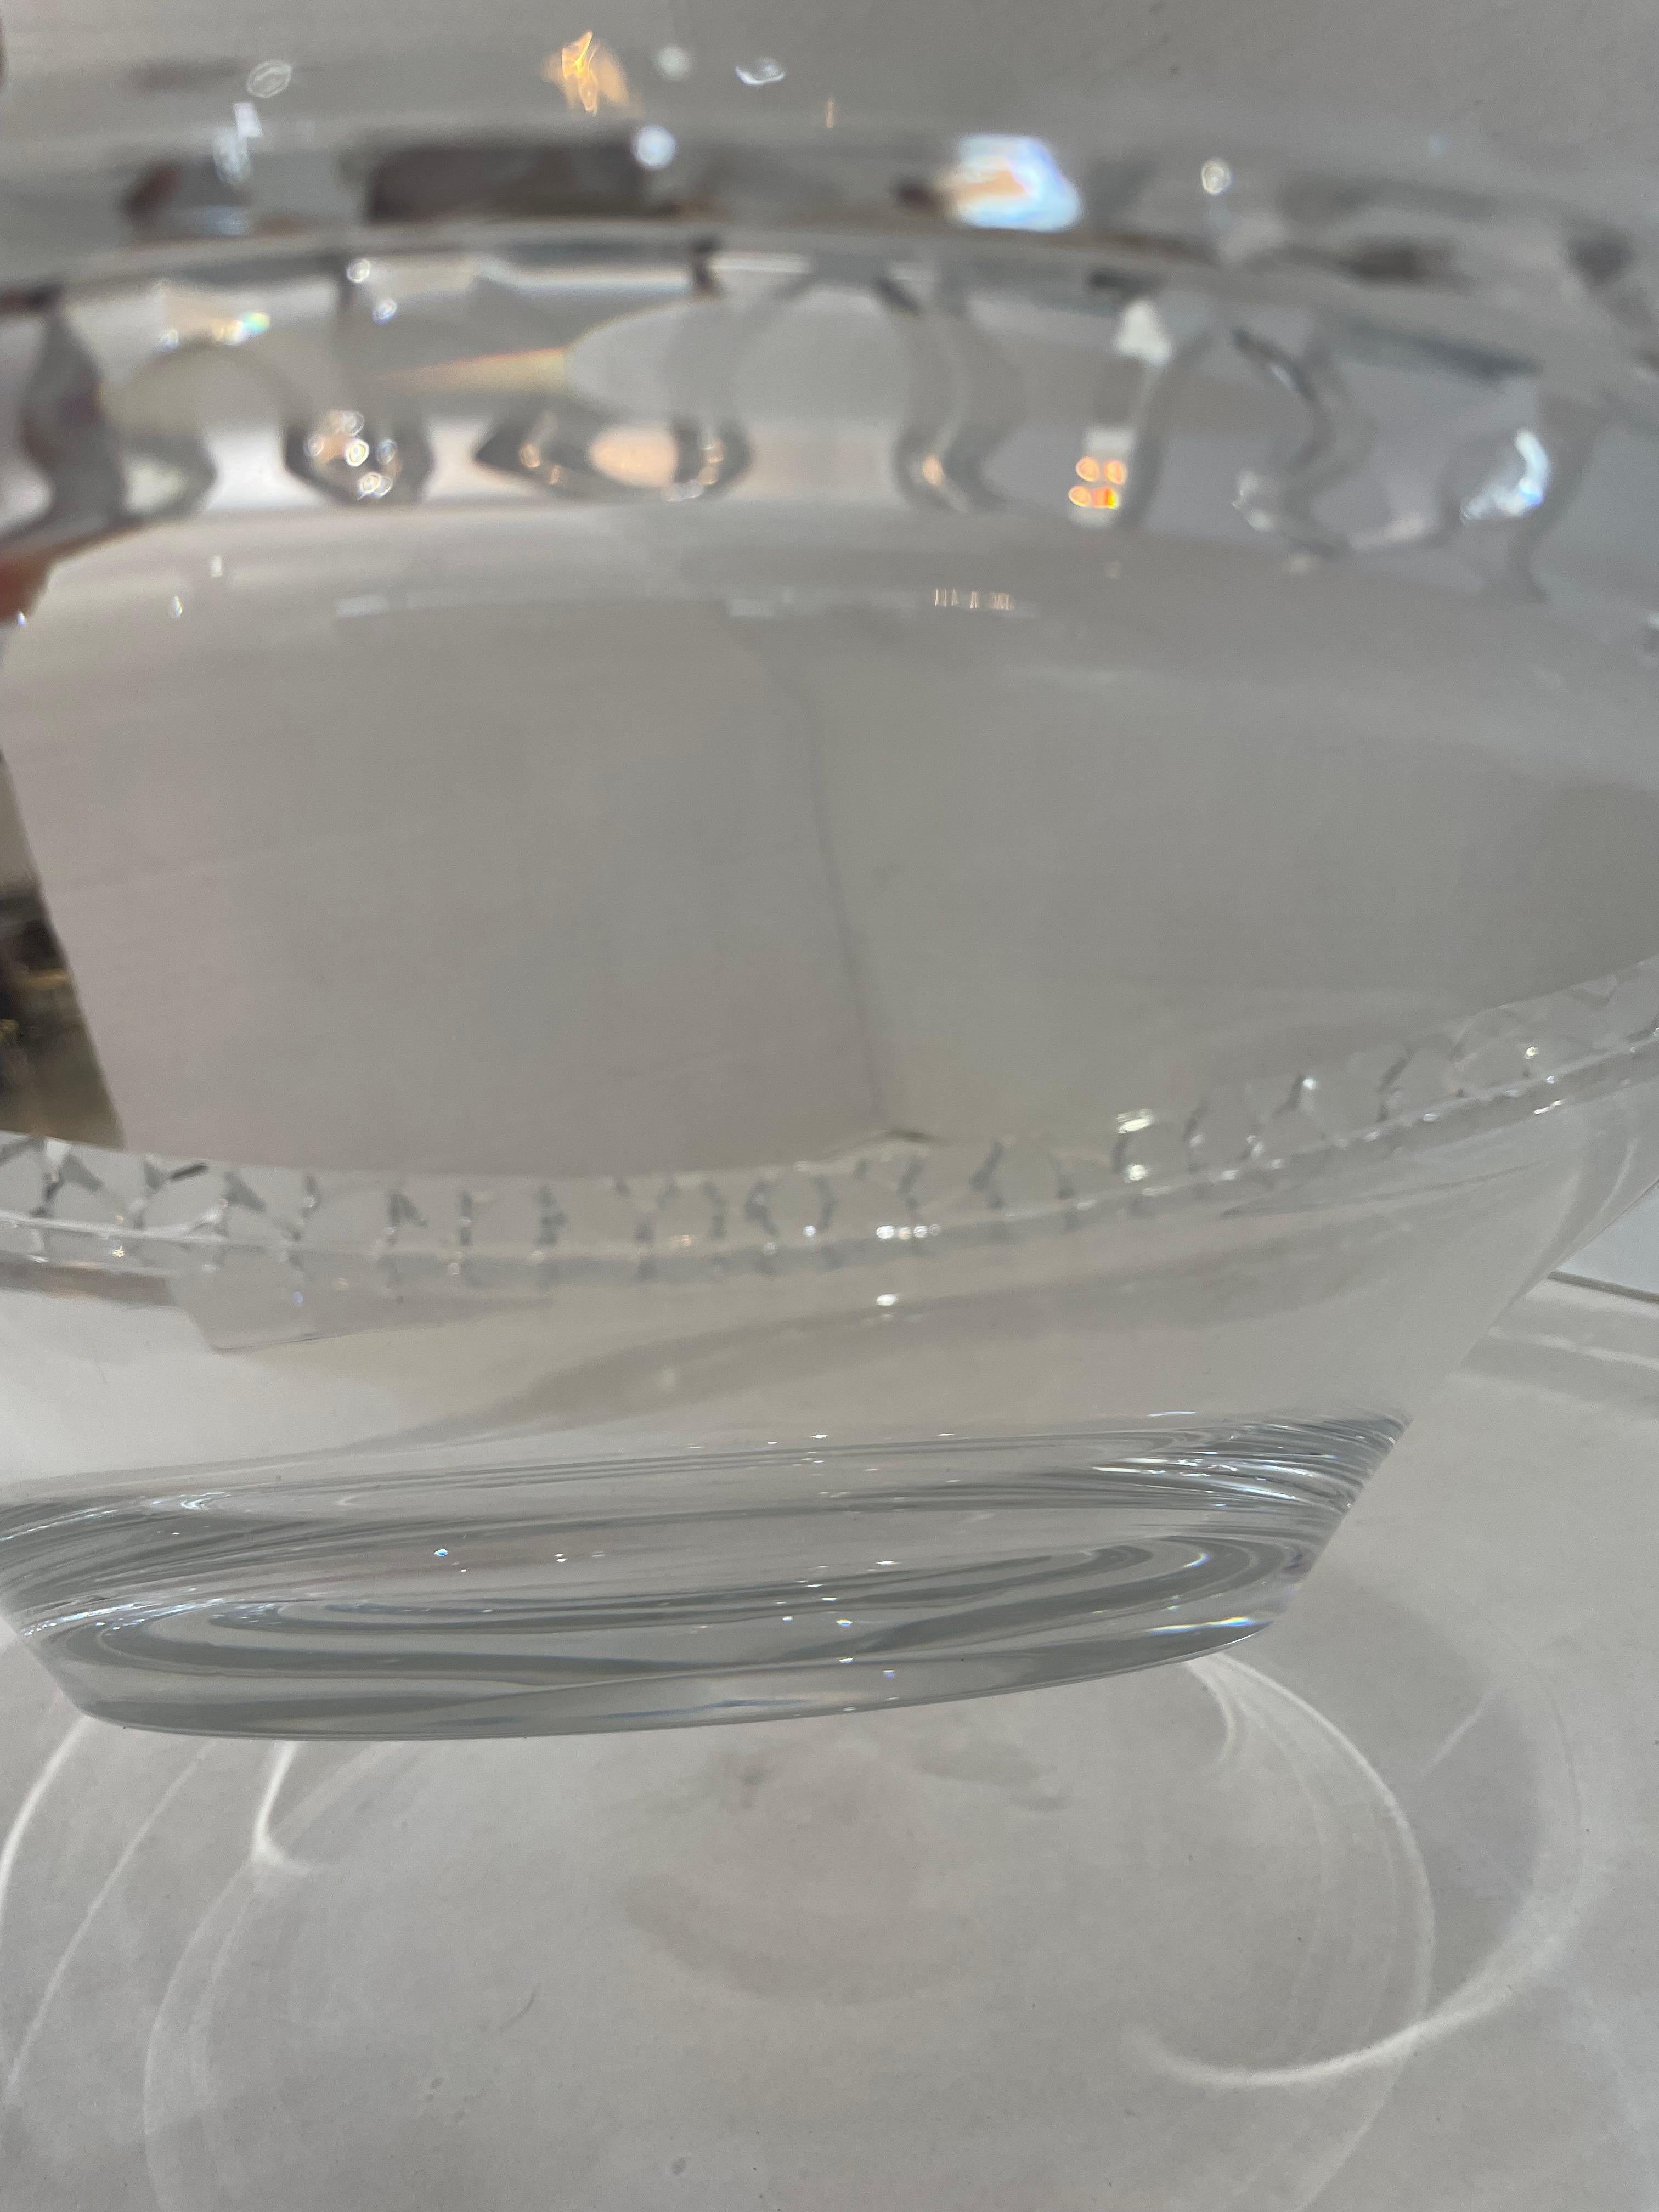 This stylish and chic Mikasa crystal serving dish will make a subtle statement with its Art Deco detailing and form. 